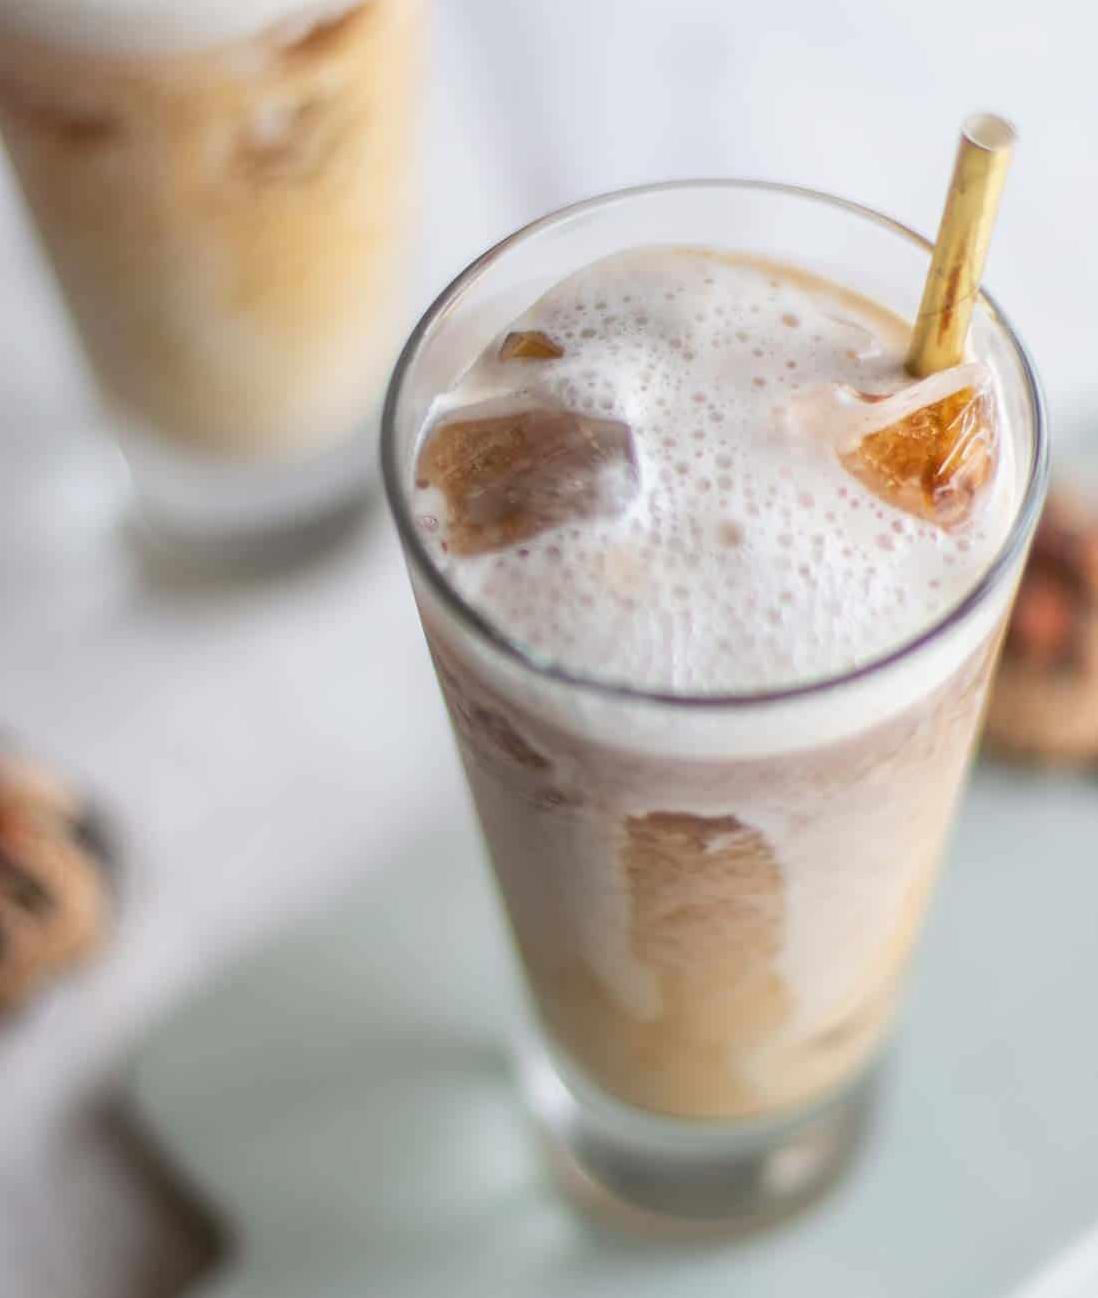  Say goodbye to the boring old cup of joe and hello to this delicious vanilla